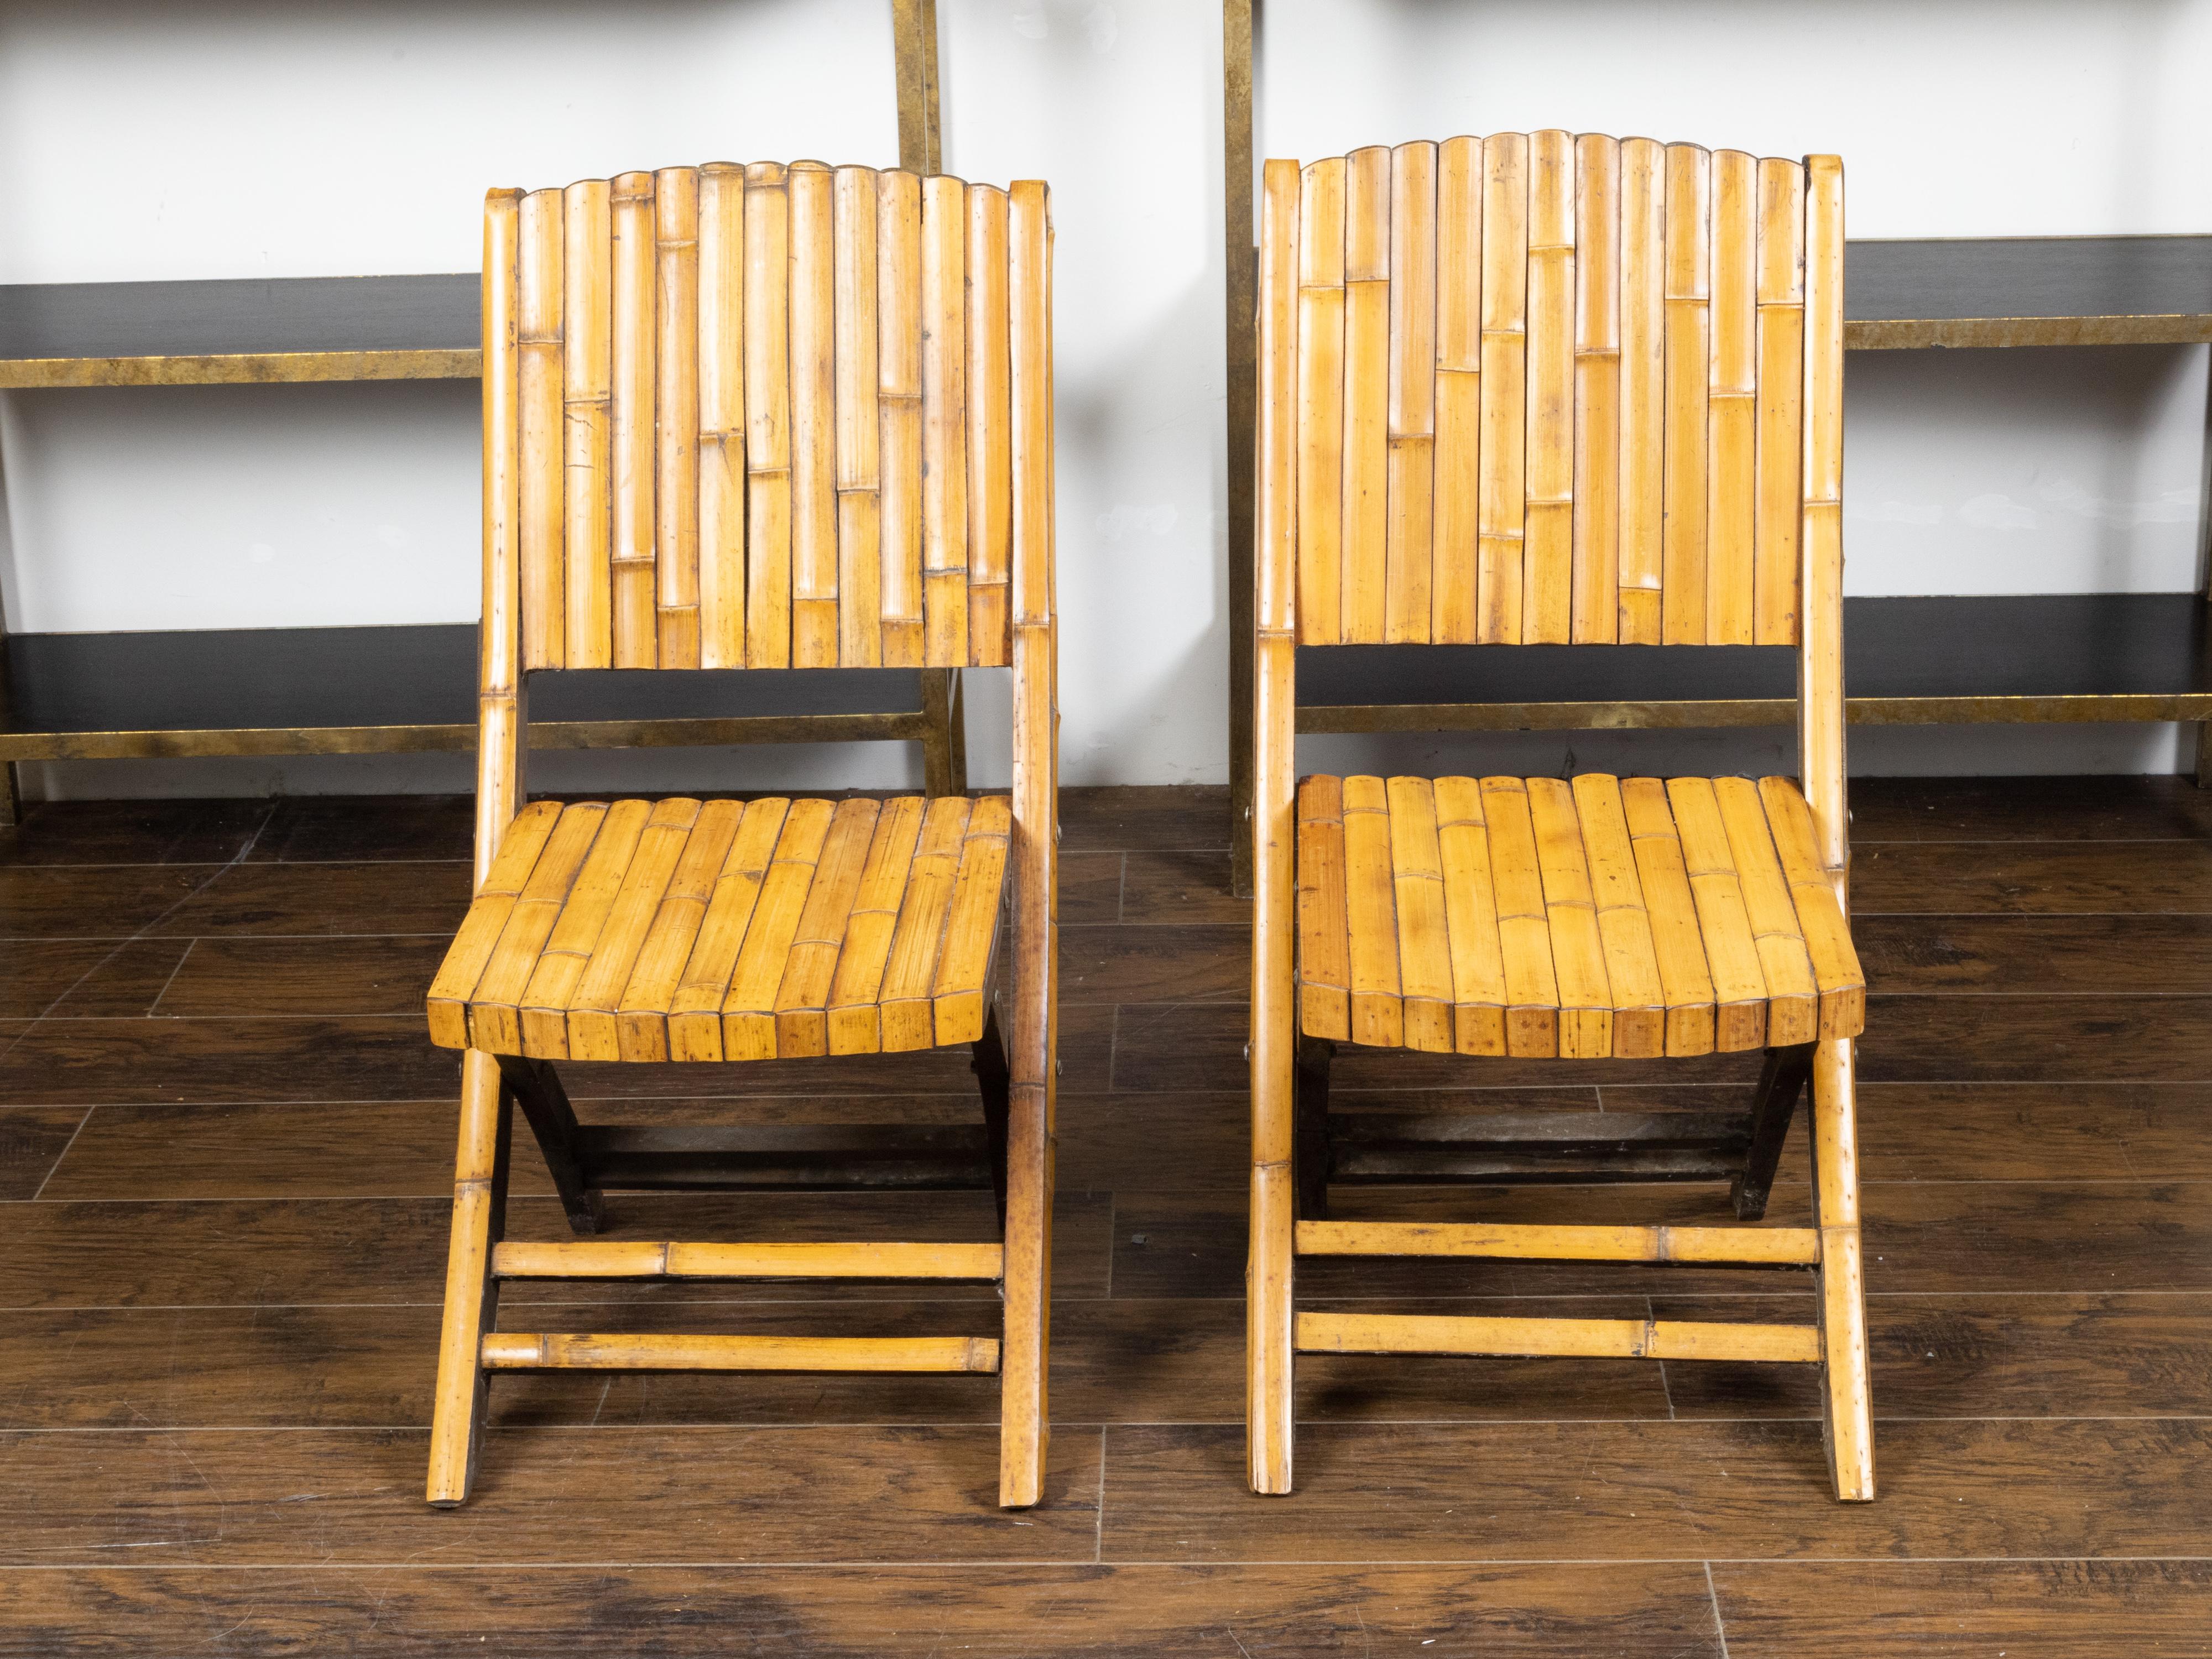 A pair of bamboo folding chairs from the mid 20th century, with light brown patina. Created during the midcentury period, each of this pair of folding chairs features a slatted bamboo structure perfectly complimented by a light colored patina.